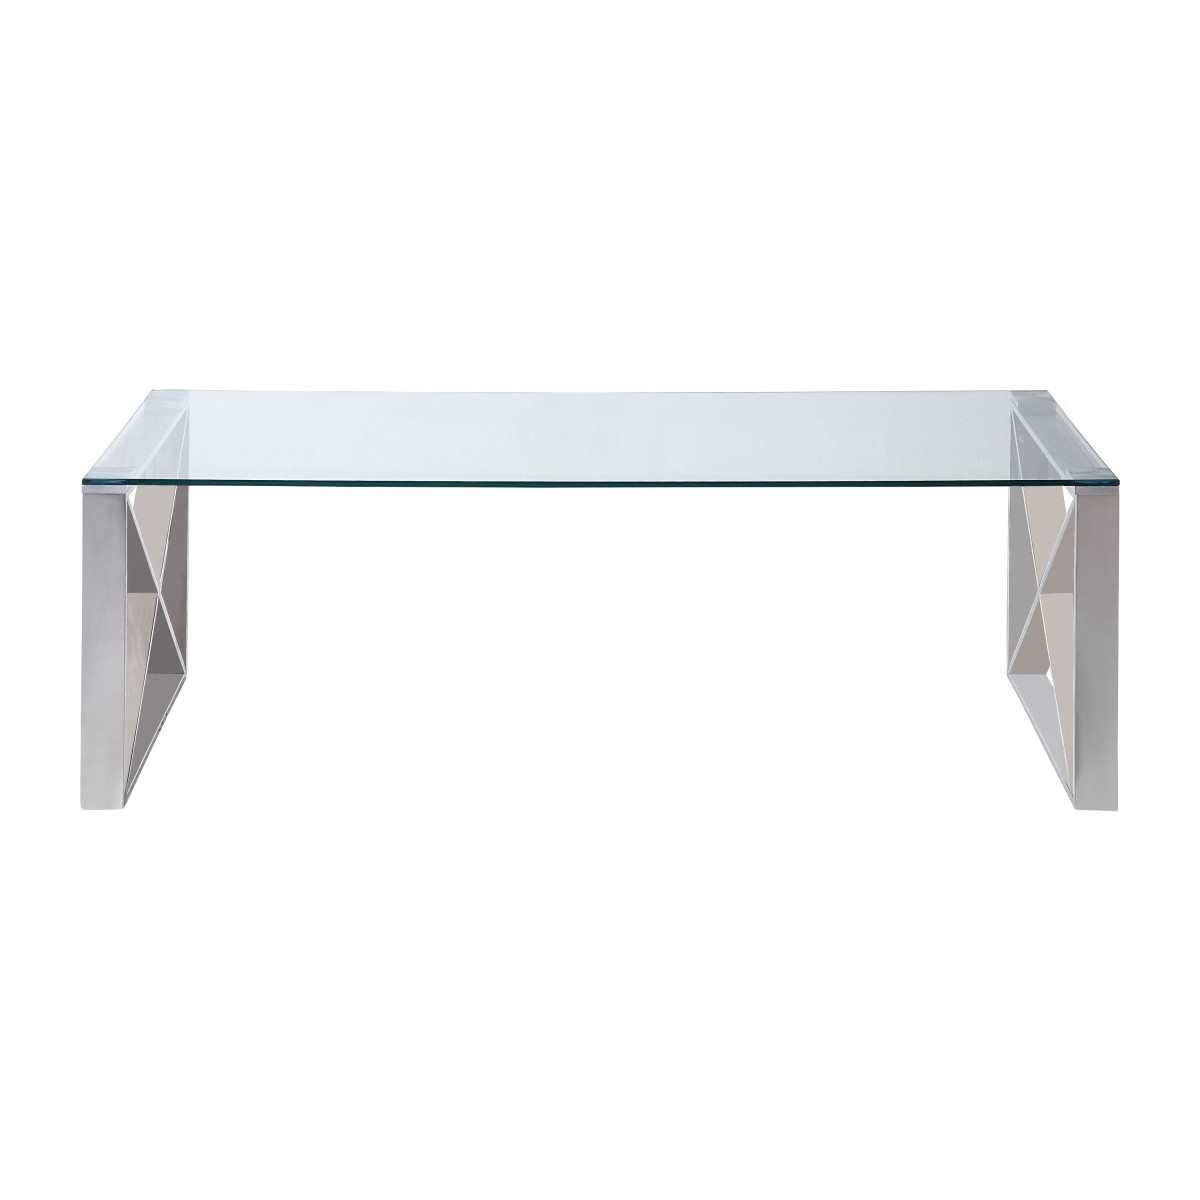 Rush Coffee Table Collection 3644